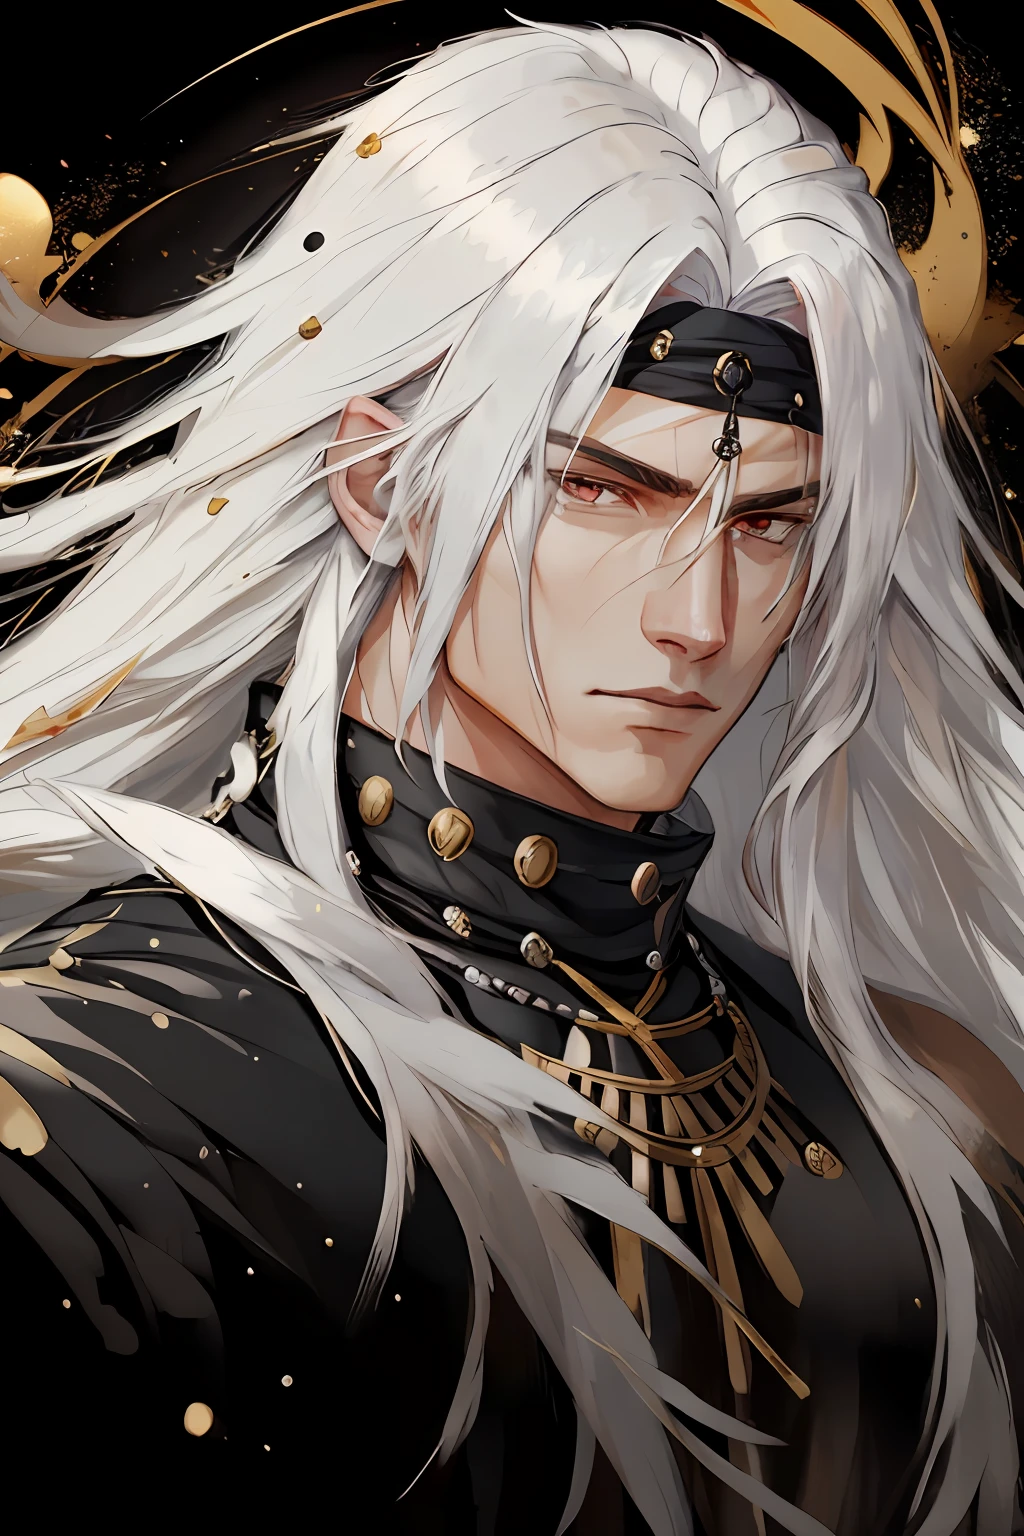 "Best quality, masterpiece, 1 boy with long white hair, white eyes, wearing a black beaded necklace, smug face, shirtless showing his muscles, adorned with a gold gauntlet, set against a portrait-style composition with an abstract background."